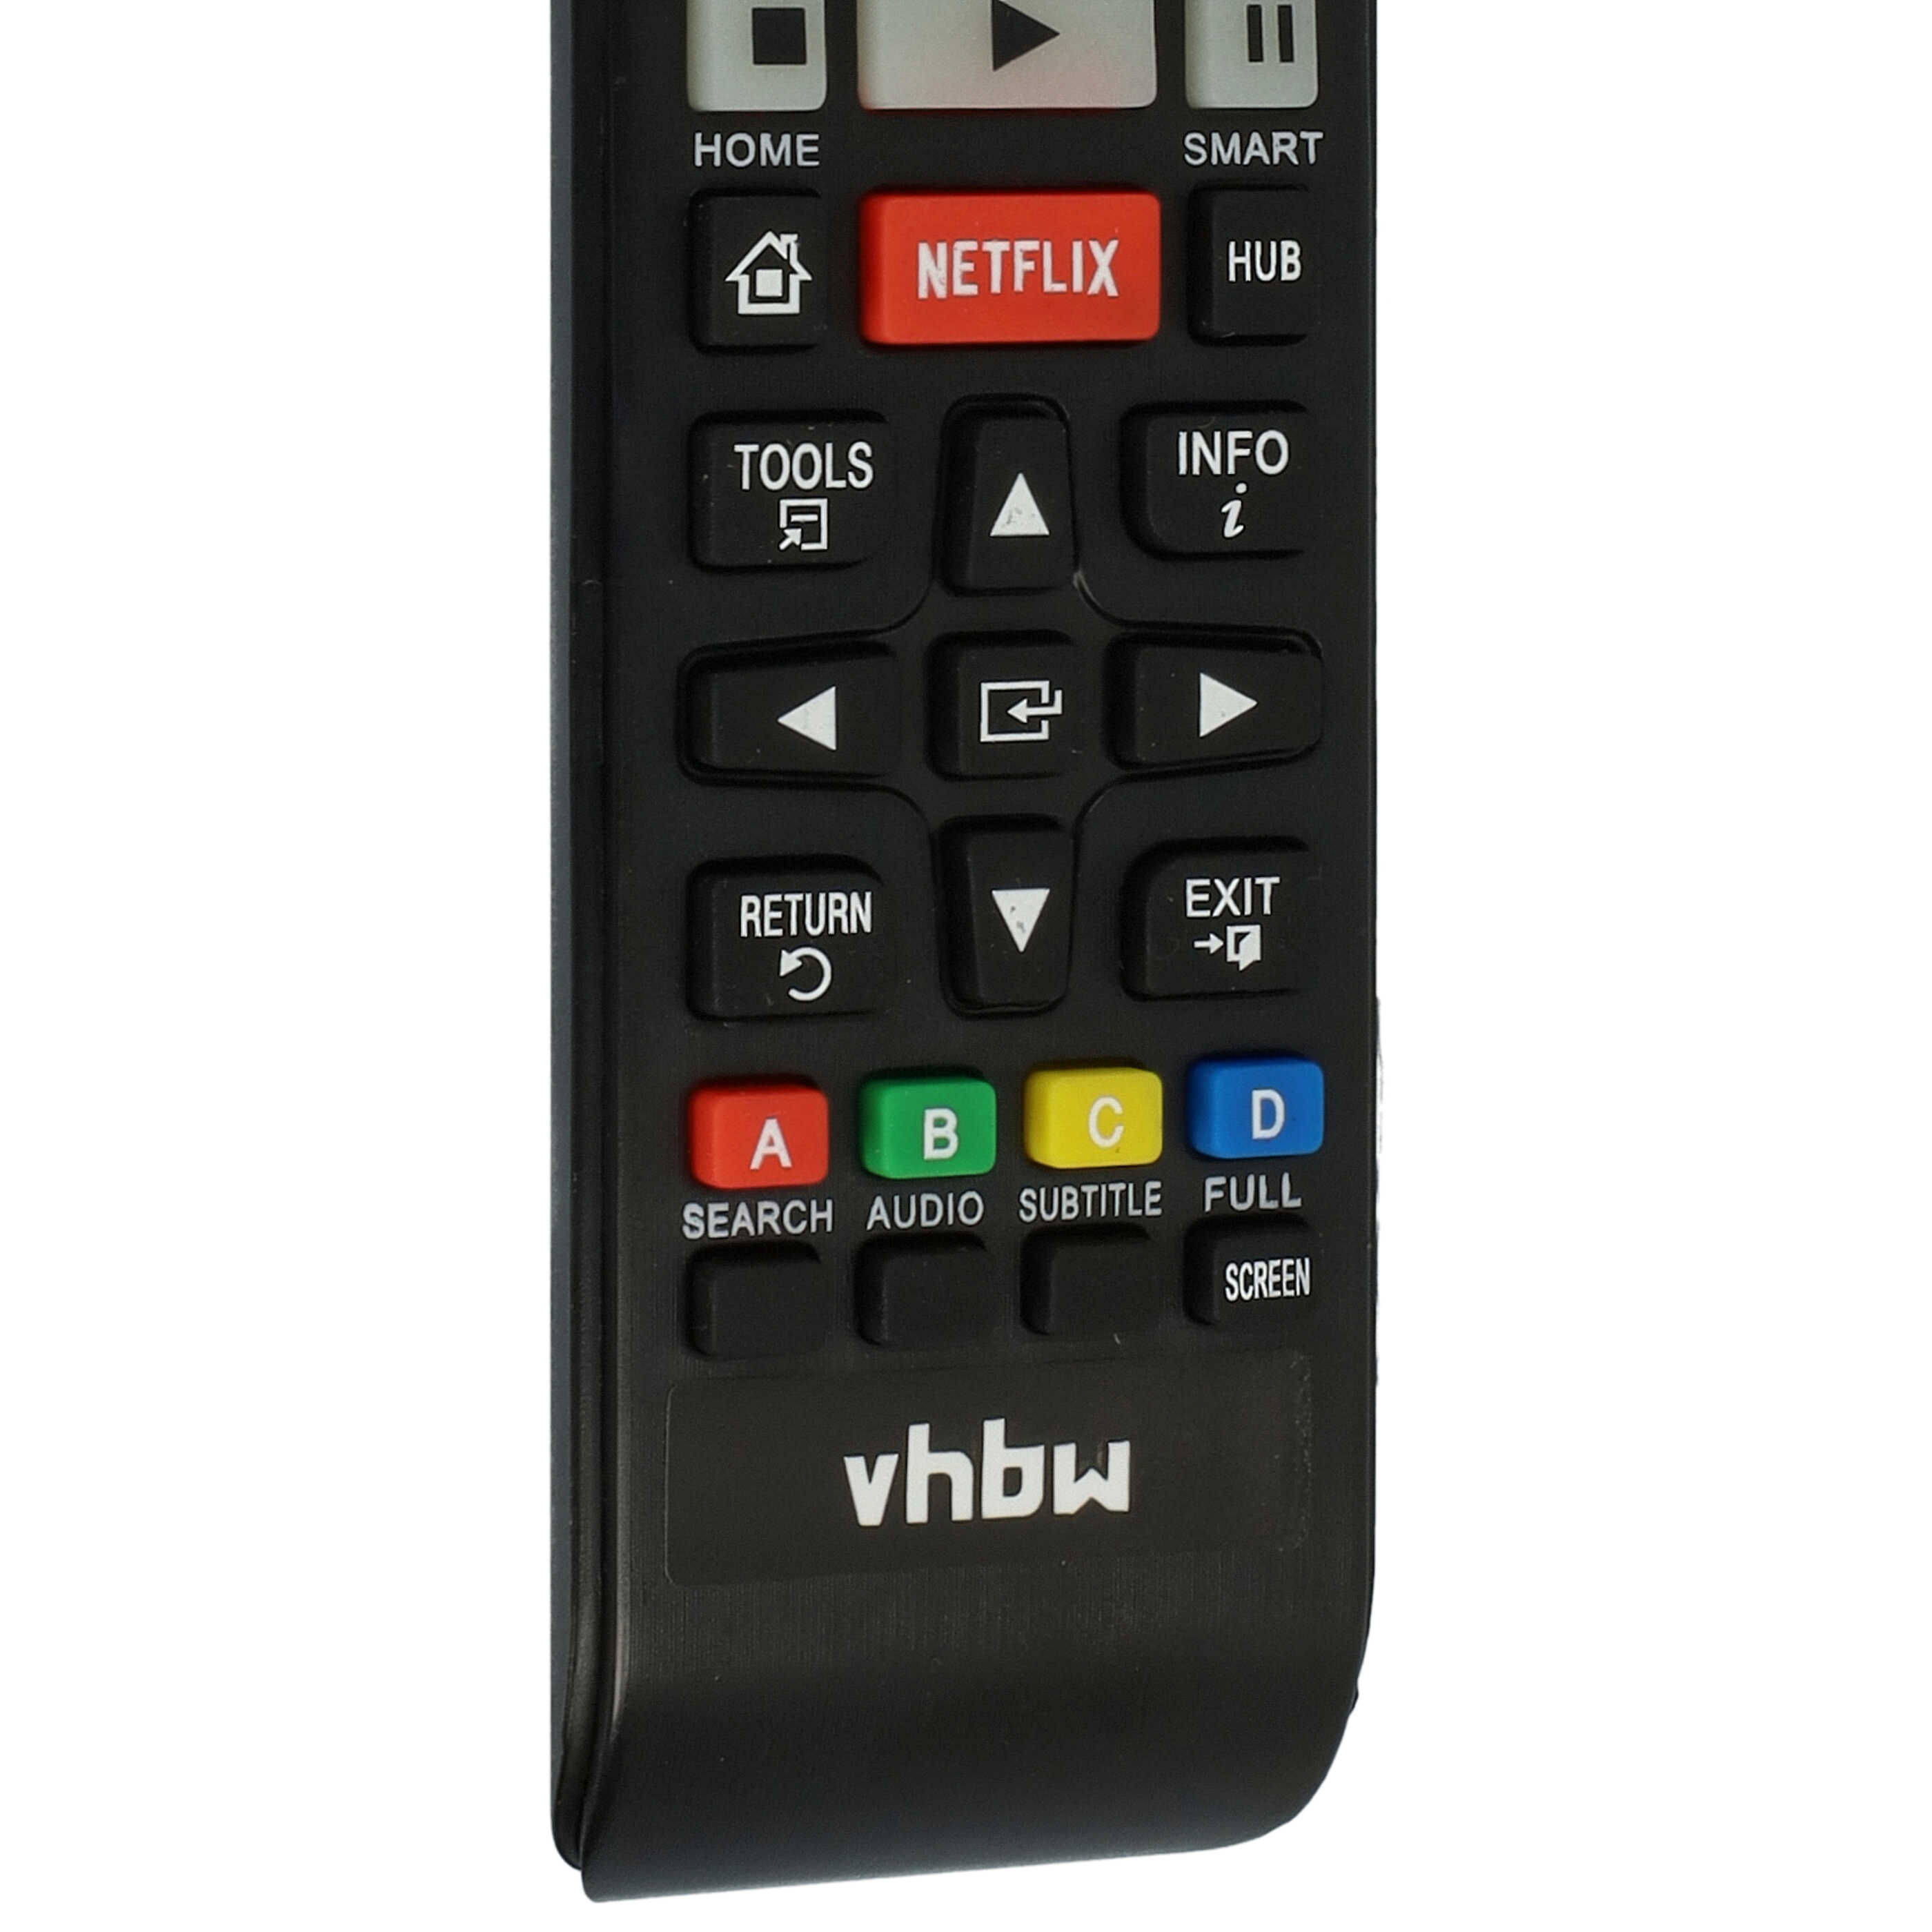 Remote Control replaces Samsung AH59-02423A, AH59-02411A, AH59-02420A for Samsung Blu-Ray Disc Player